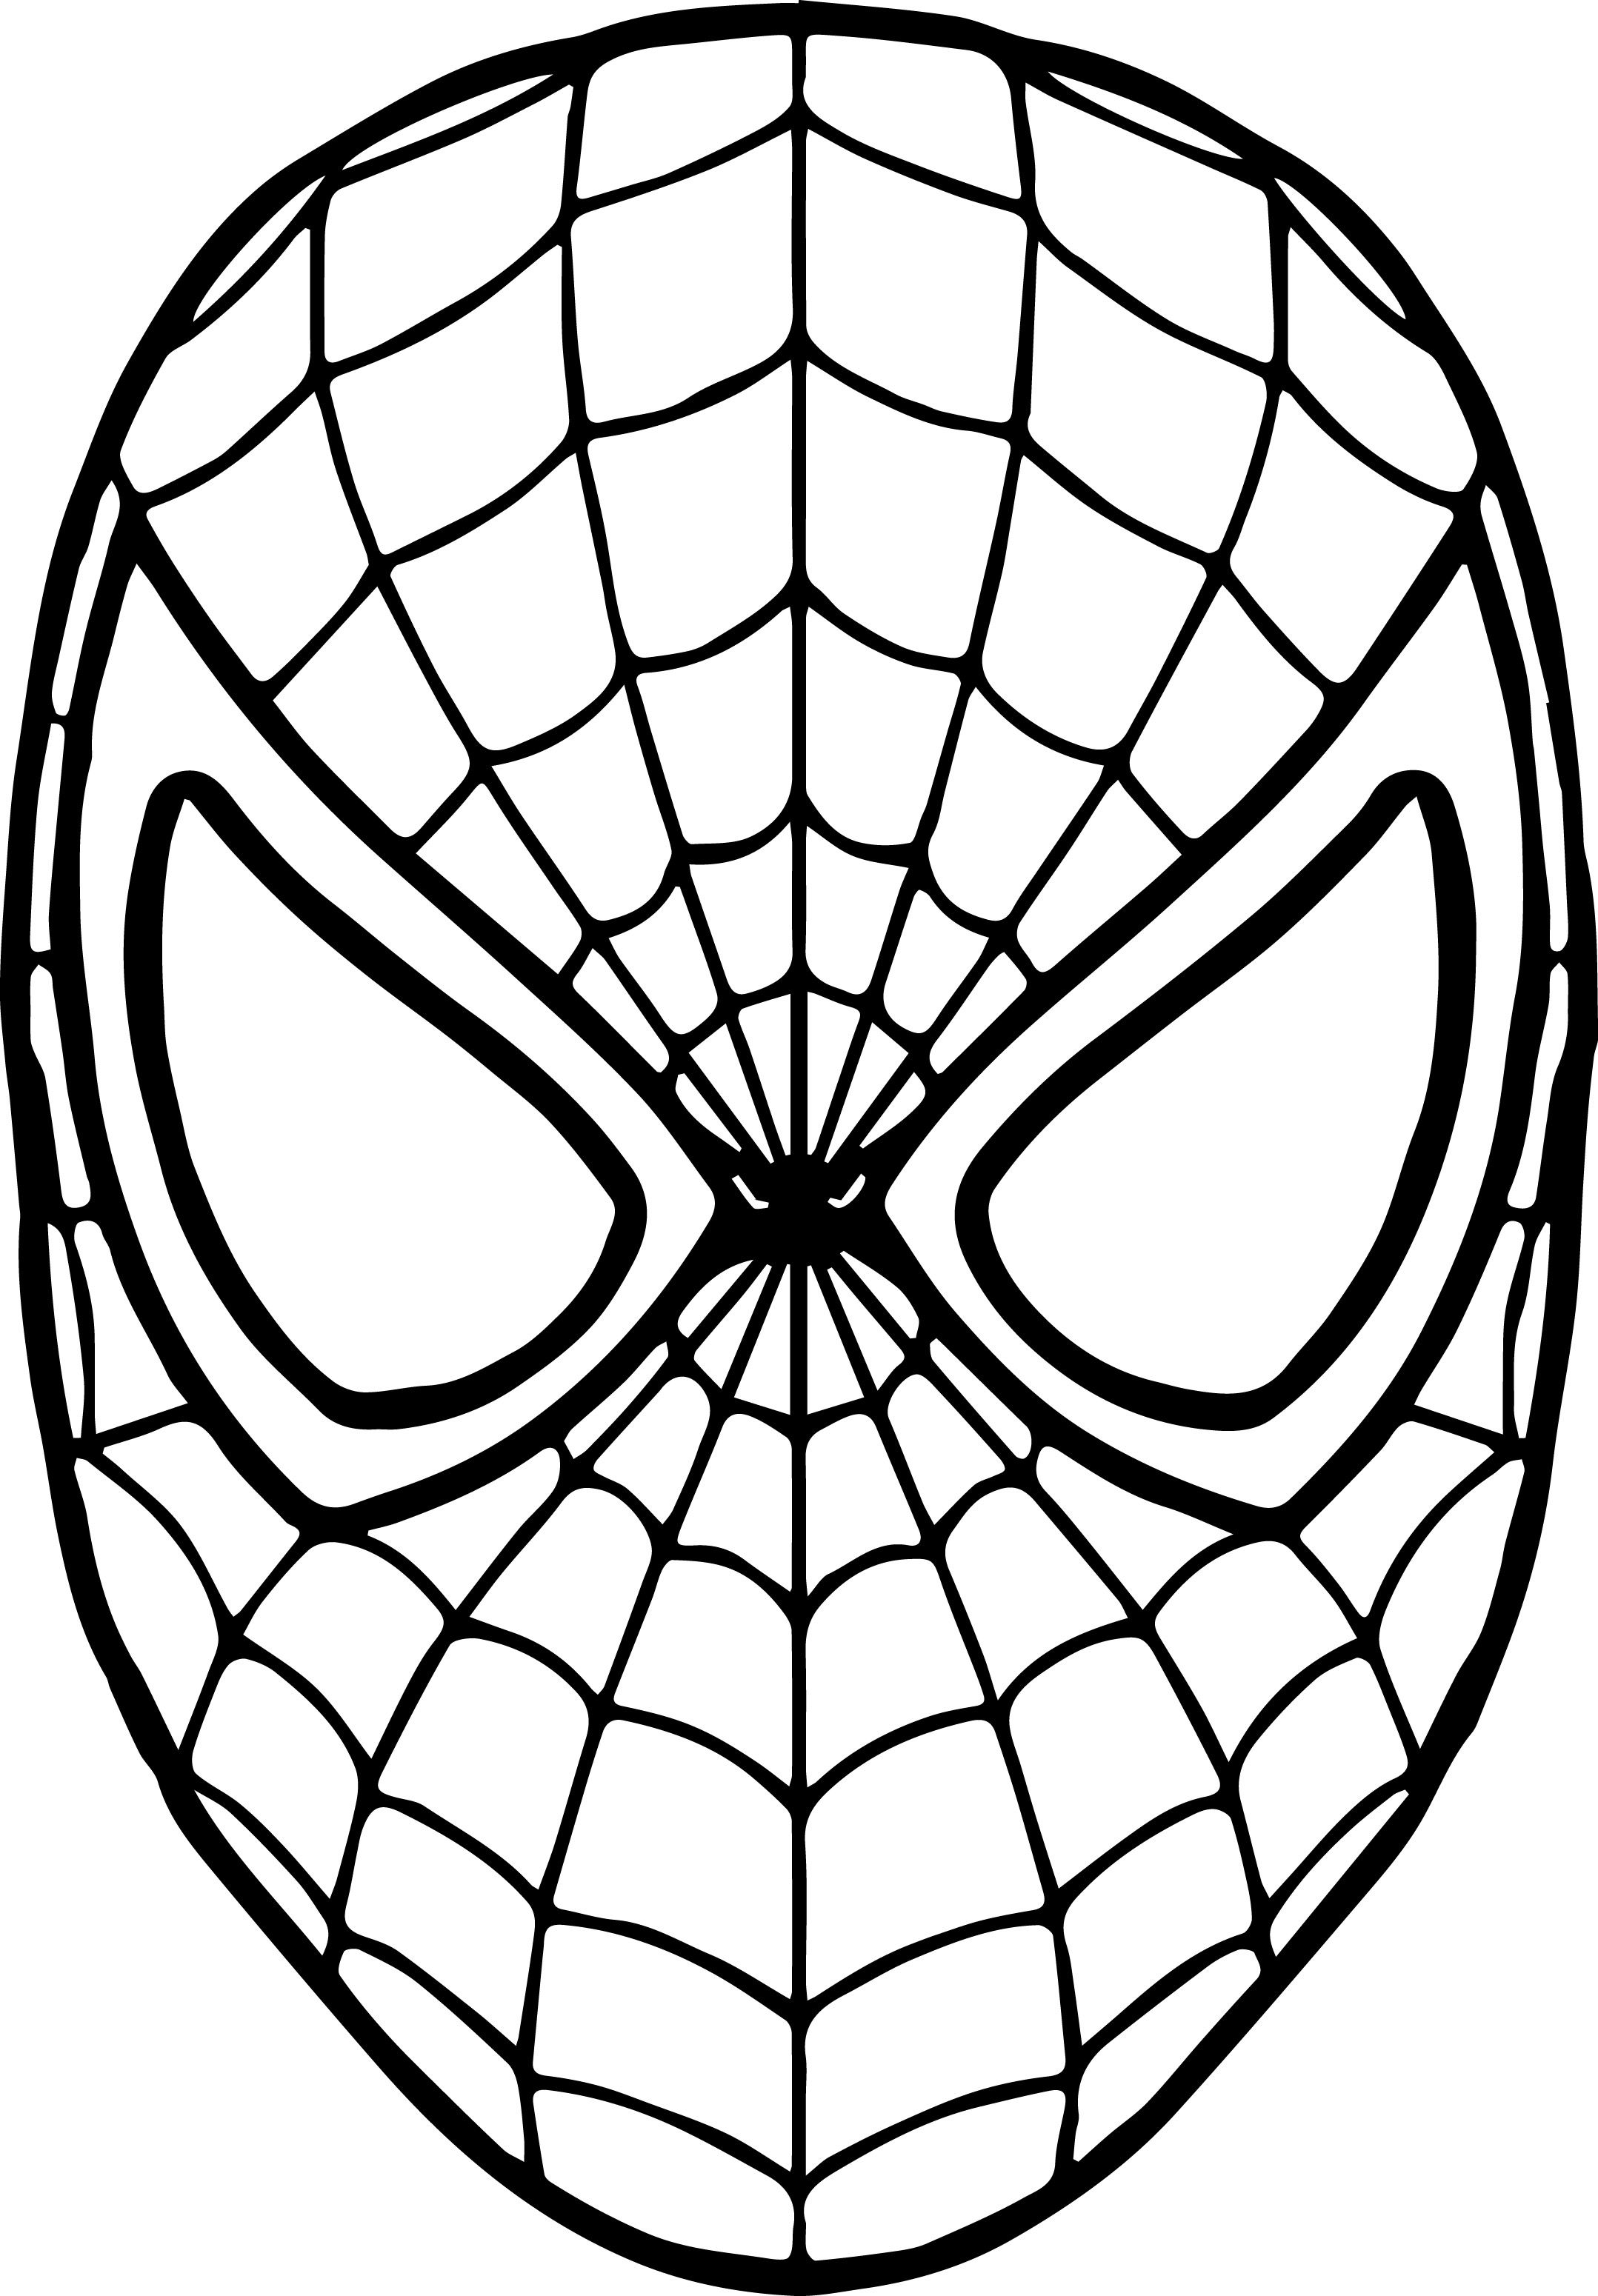 spiderman-mask-coloring-page - Wecoloringpage | Spiderman mask, Spiderman  coloring, Spiderman face